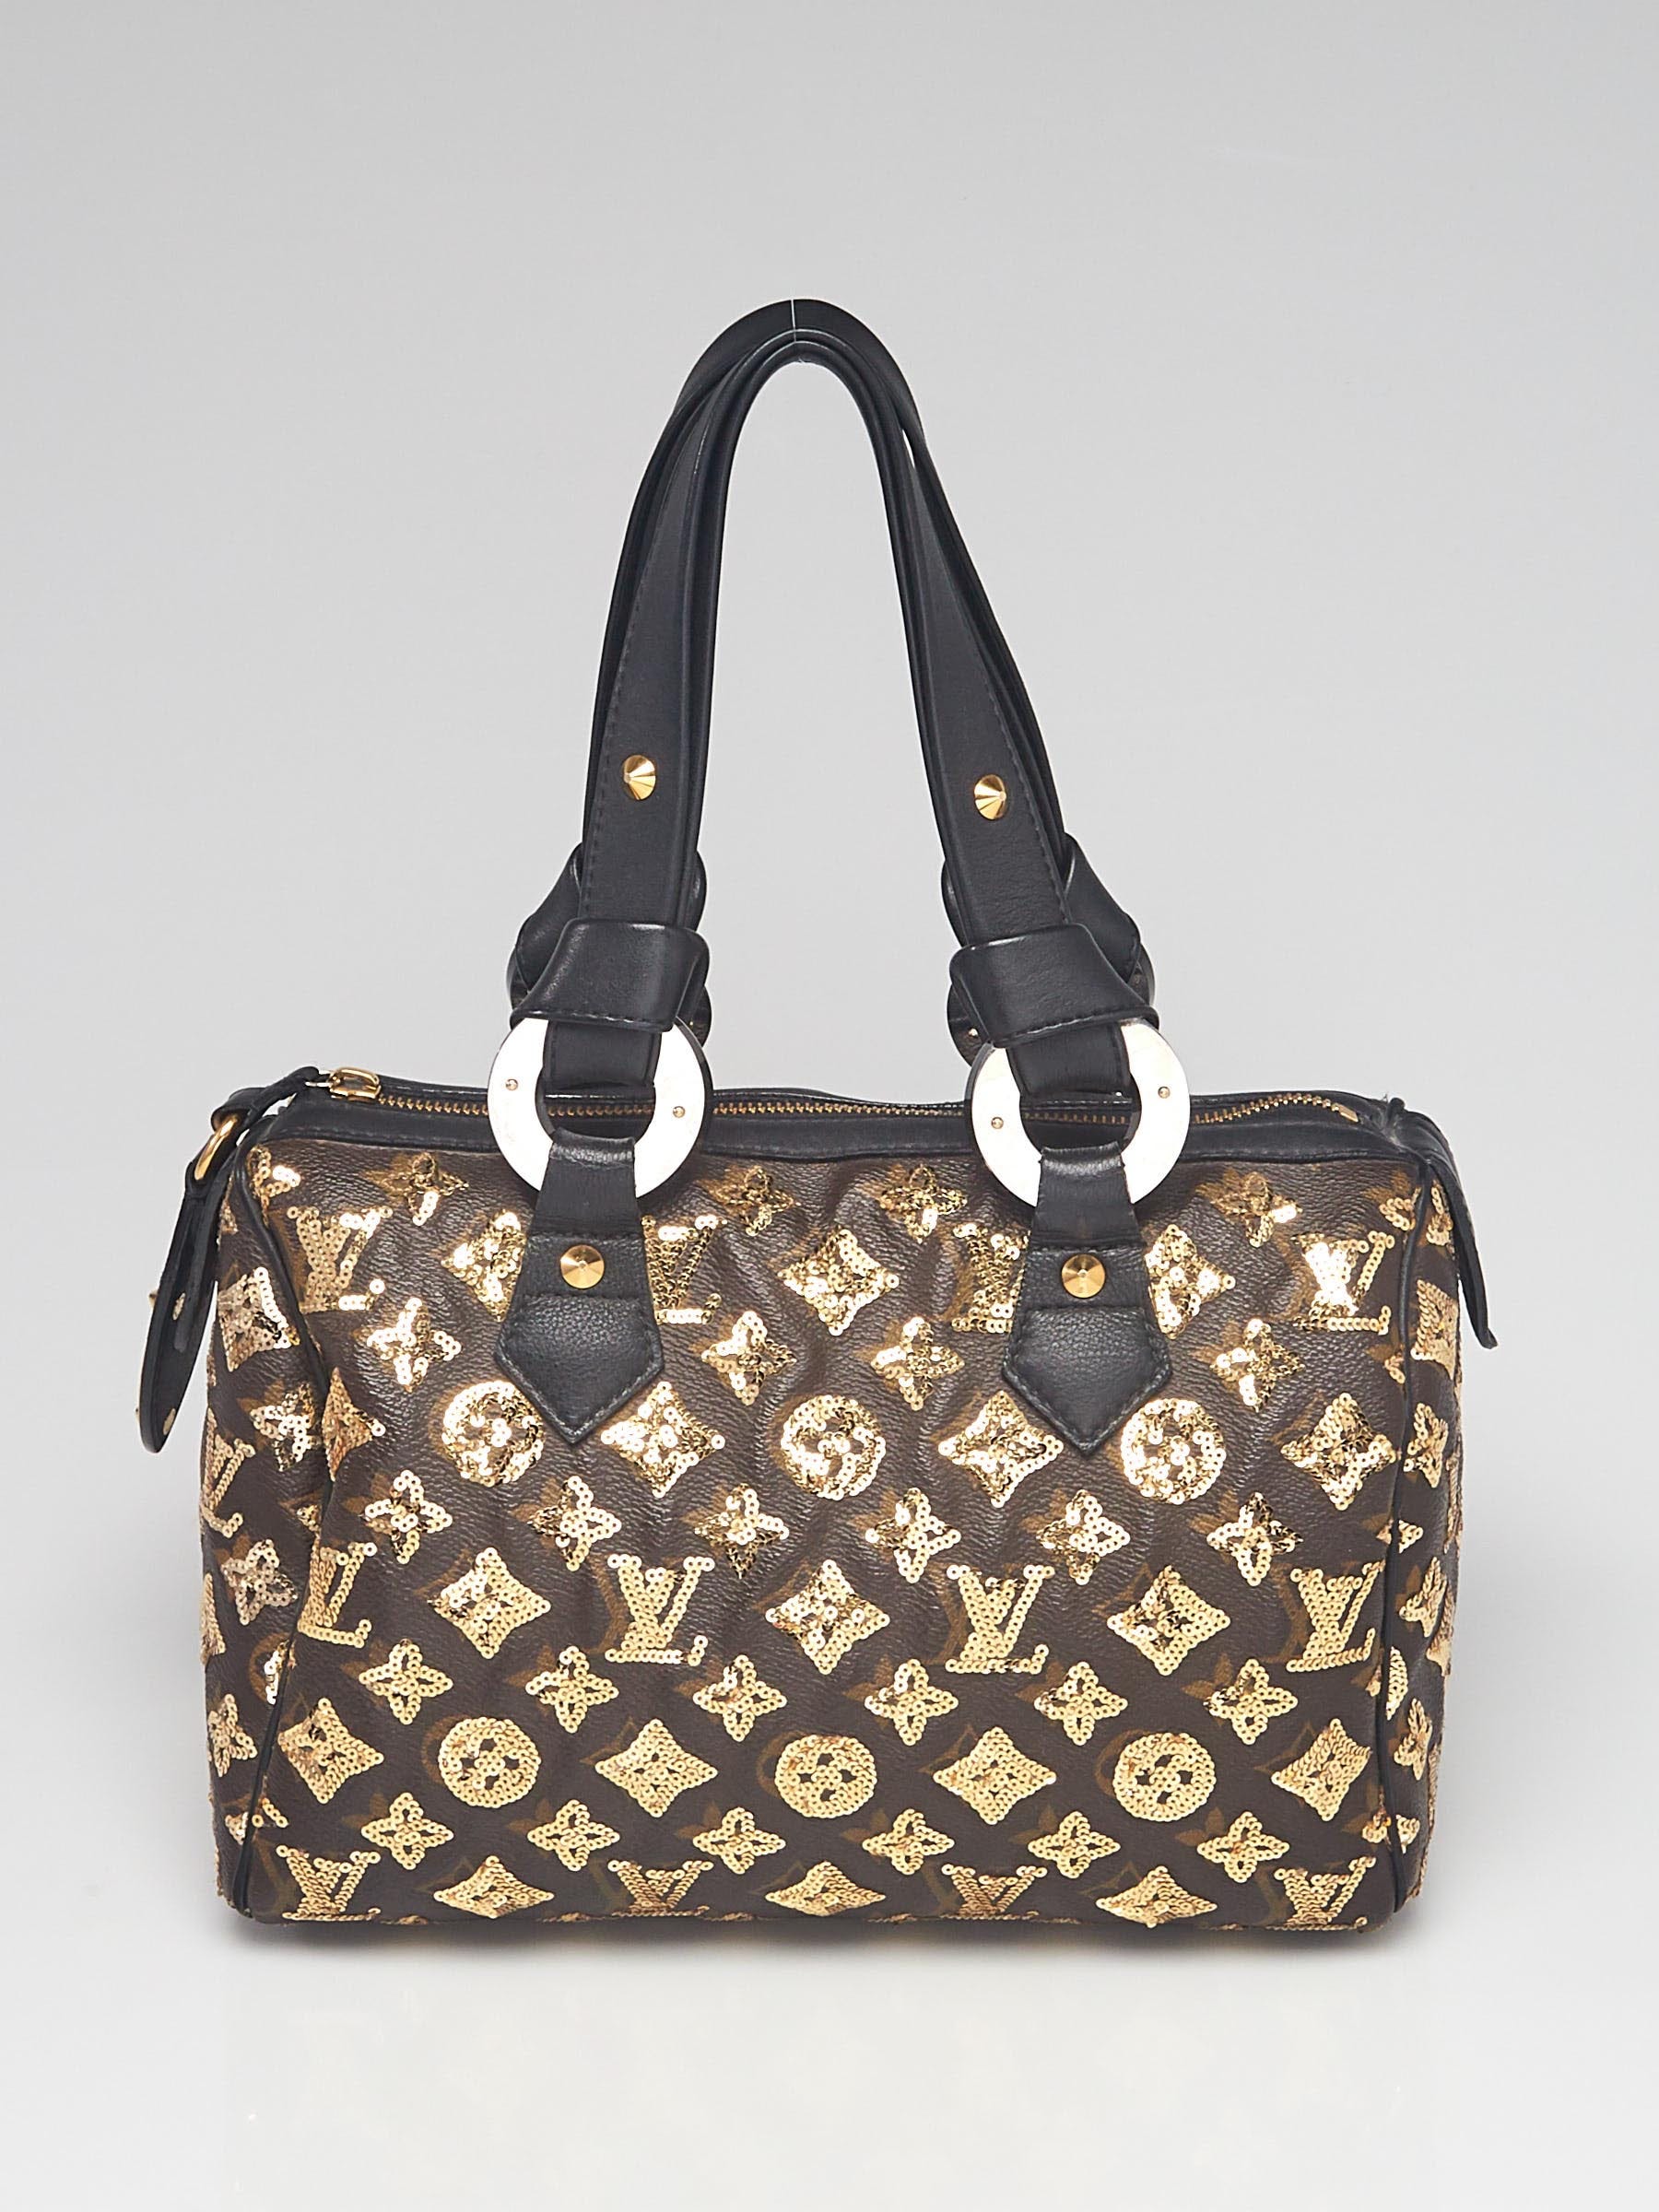 Handbags Louis Vuitton Louis Vuitton Limited Edition Monogram Eclipse Speedy 30 in Black Sequins and Coated Canvas